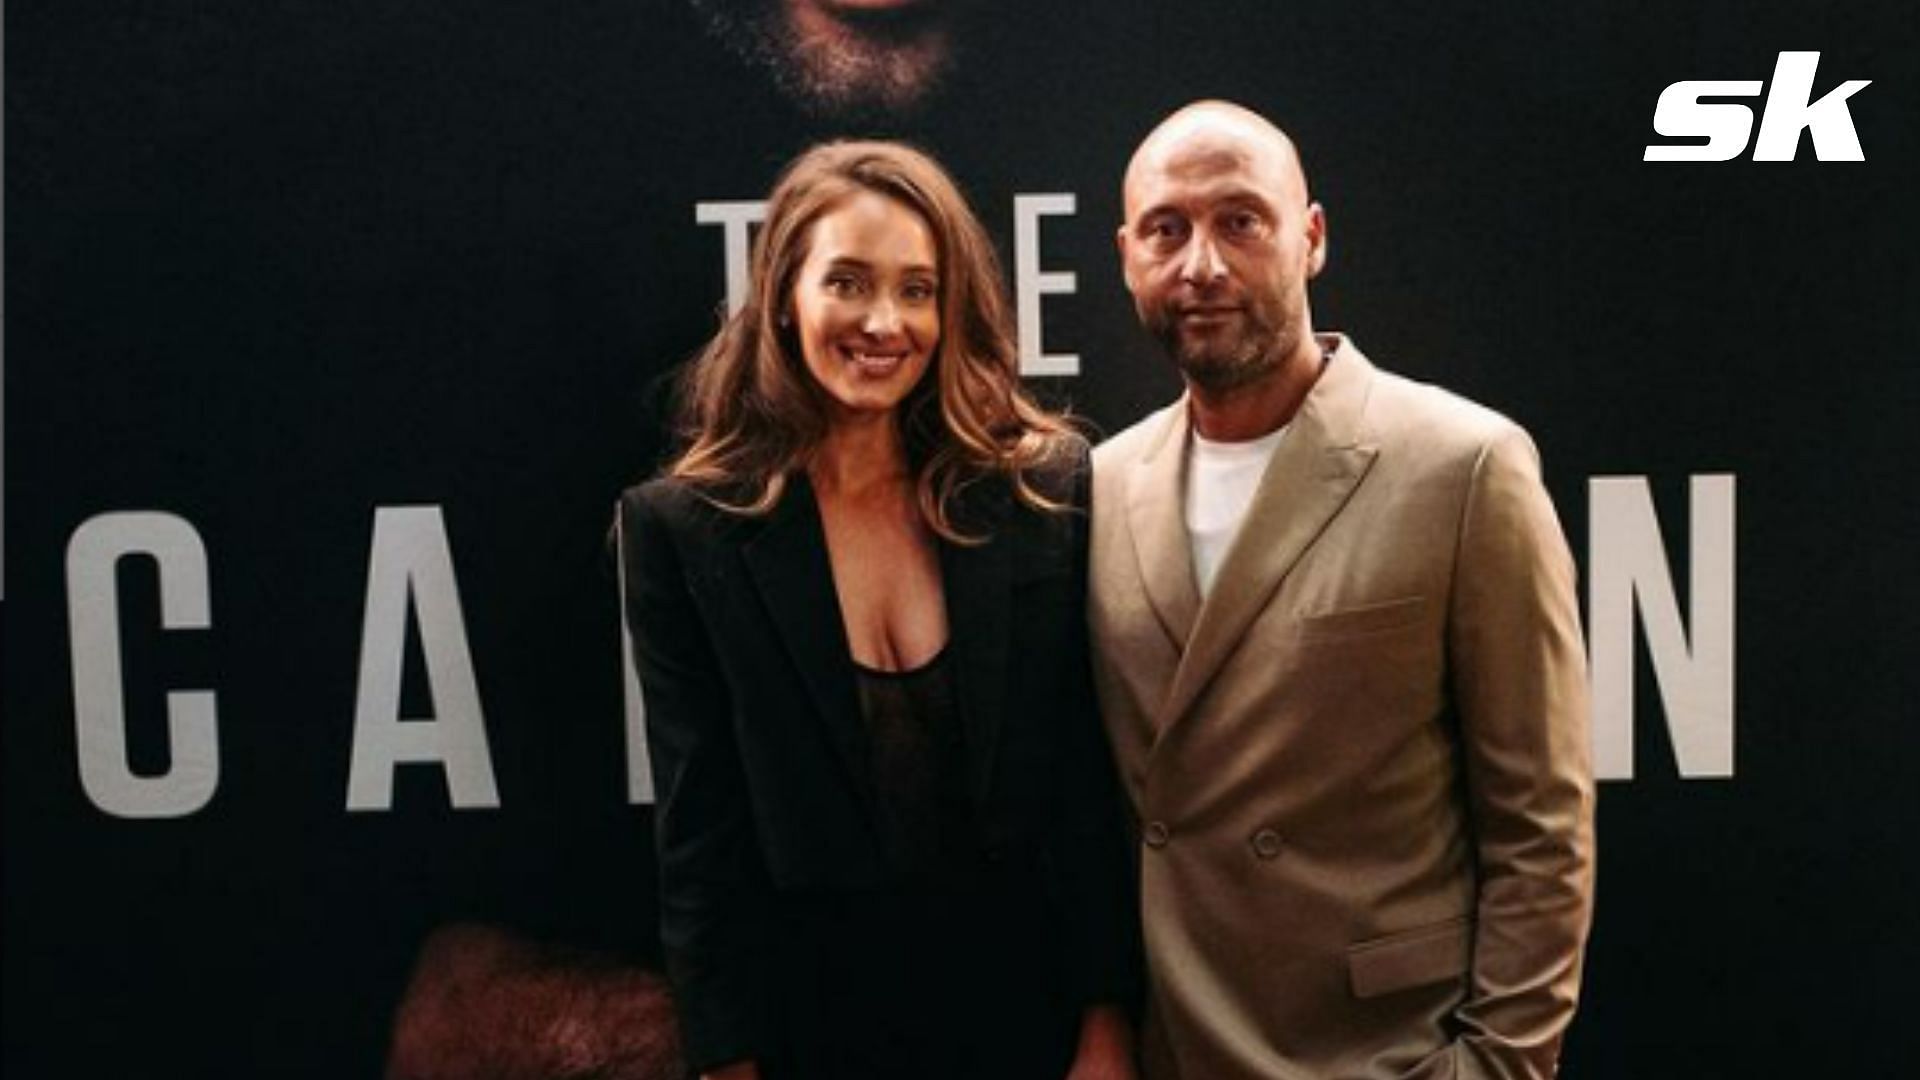 When Hannah Jeter stole the spotlight in maternity attire at Sports  illustrated swimsuit issue launch party